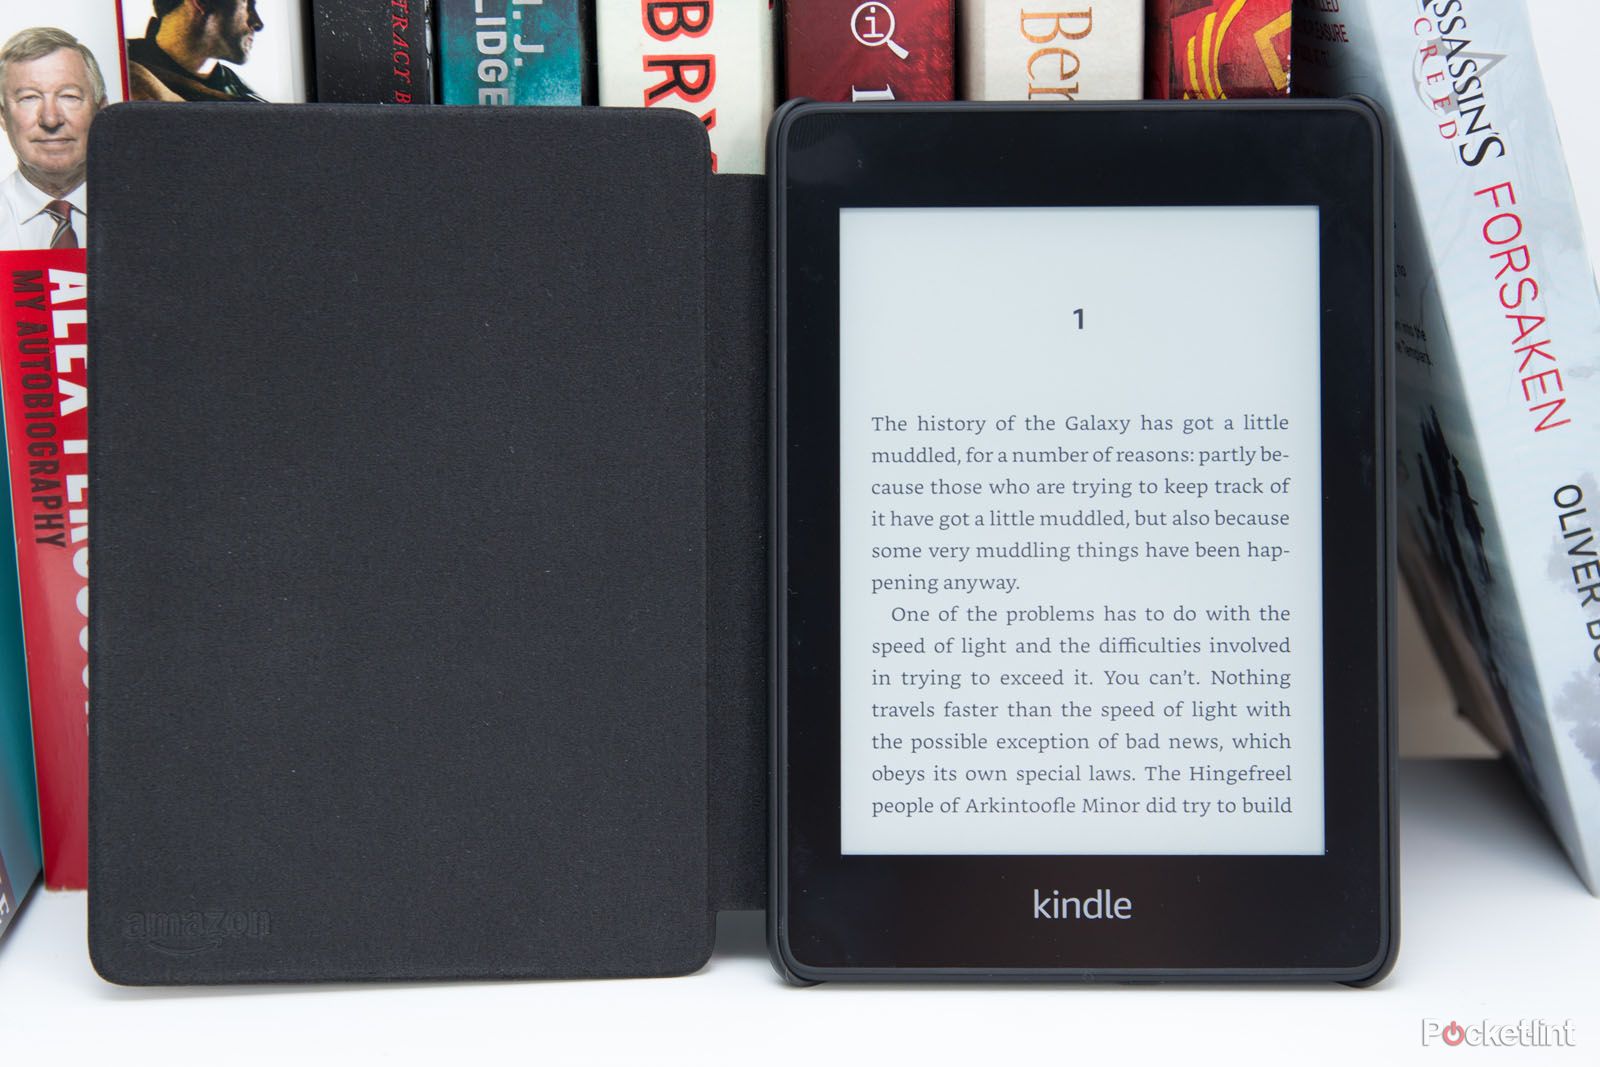 Amazon UK now enables you to gift Kindle books - the ideal last-minute present image 1